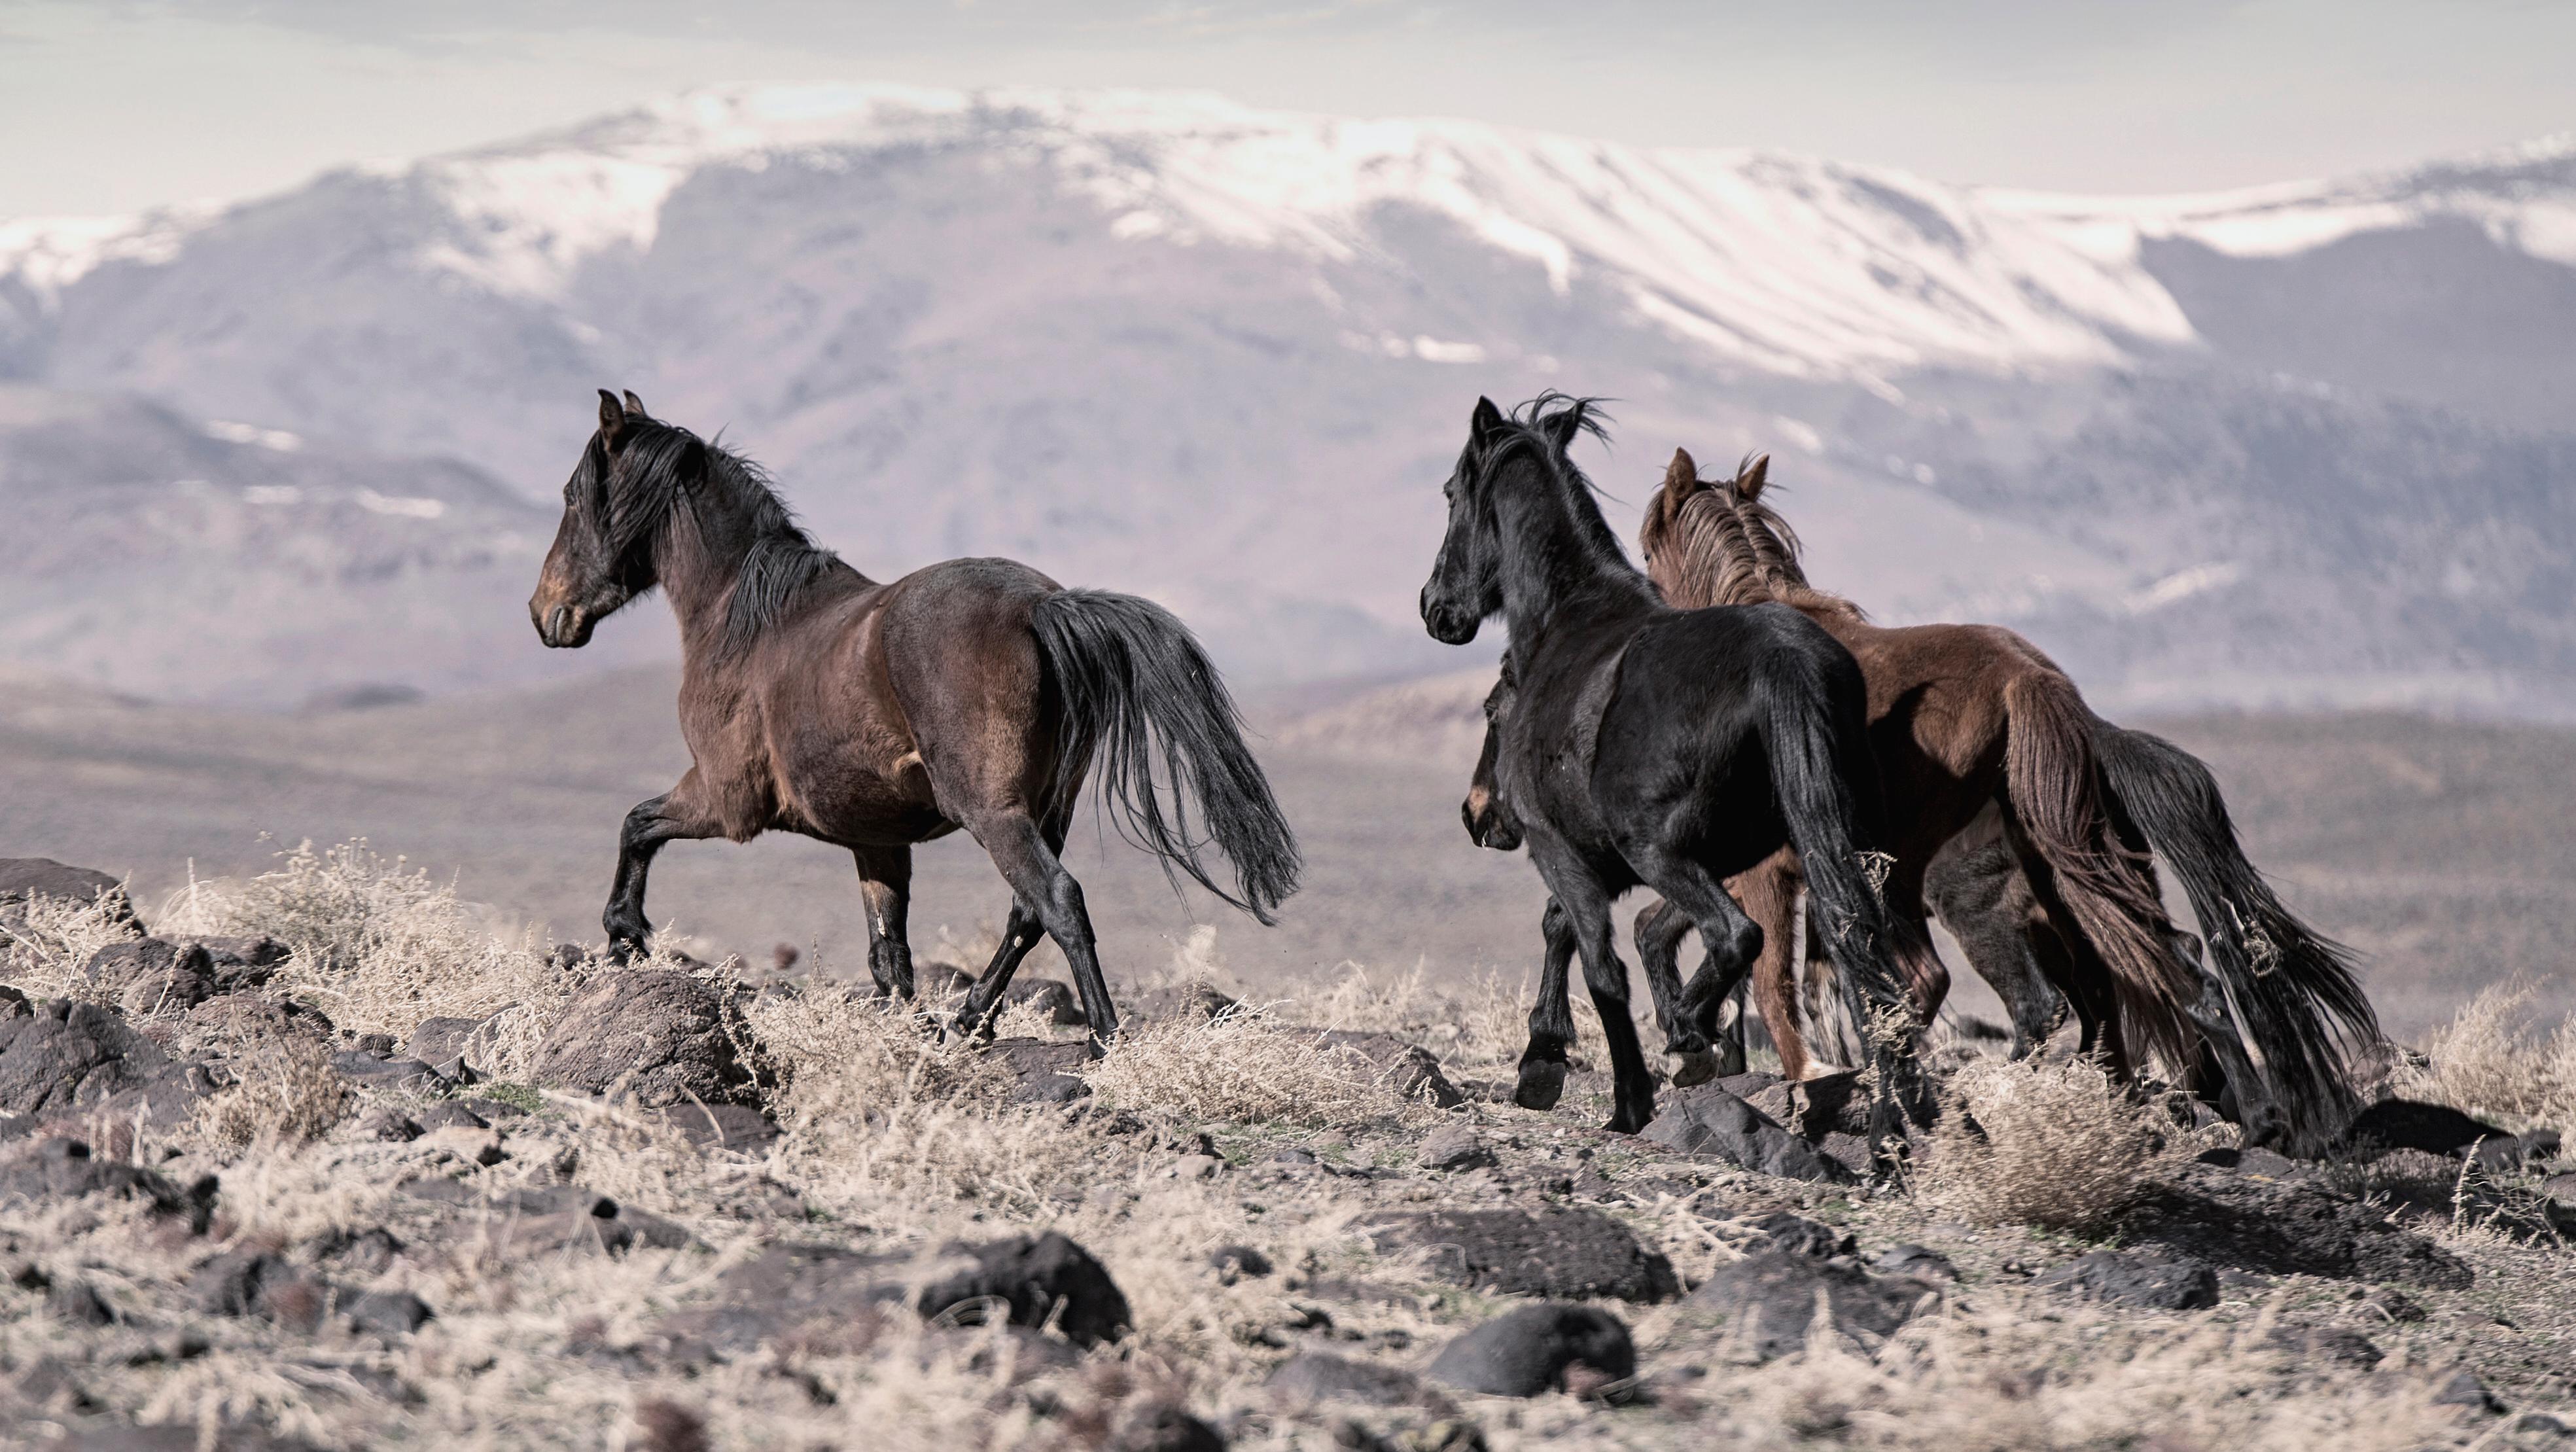 "On the Go" 20x30 Wild Horses, Mustangs by Shane Russeck